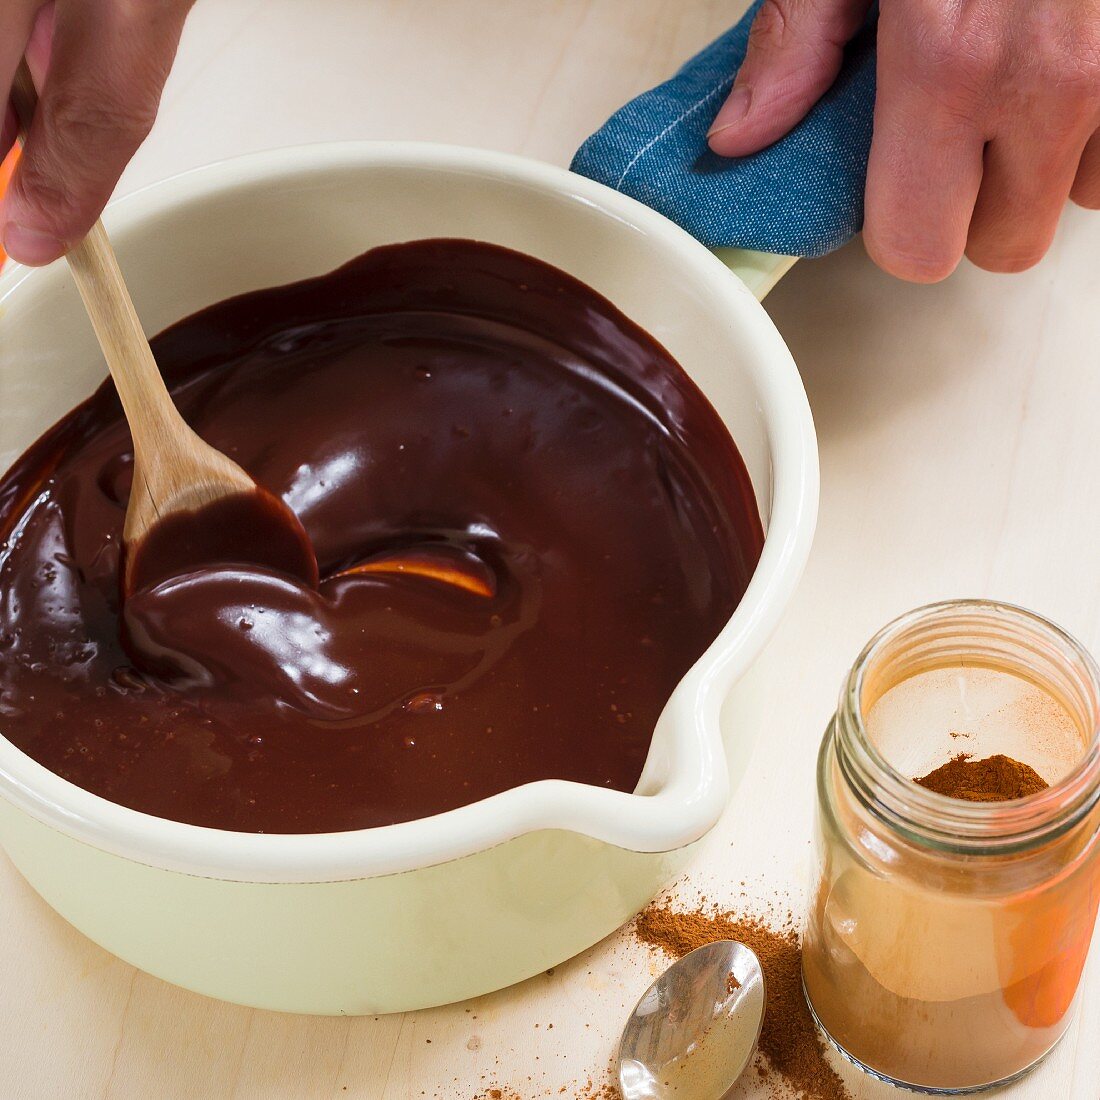 Chocolate sauce being made from vegan chocolate and coconut milk